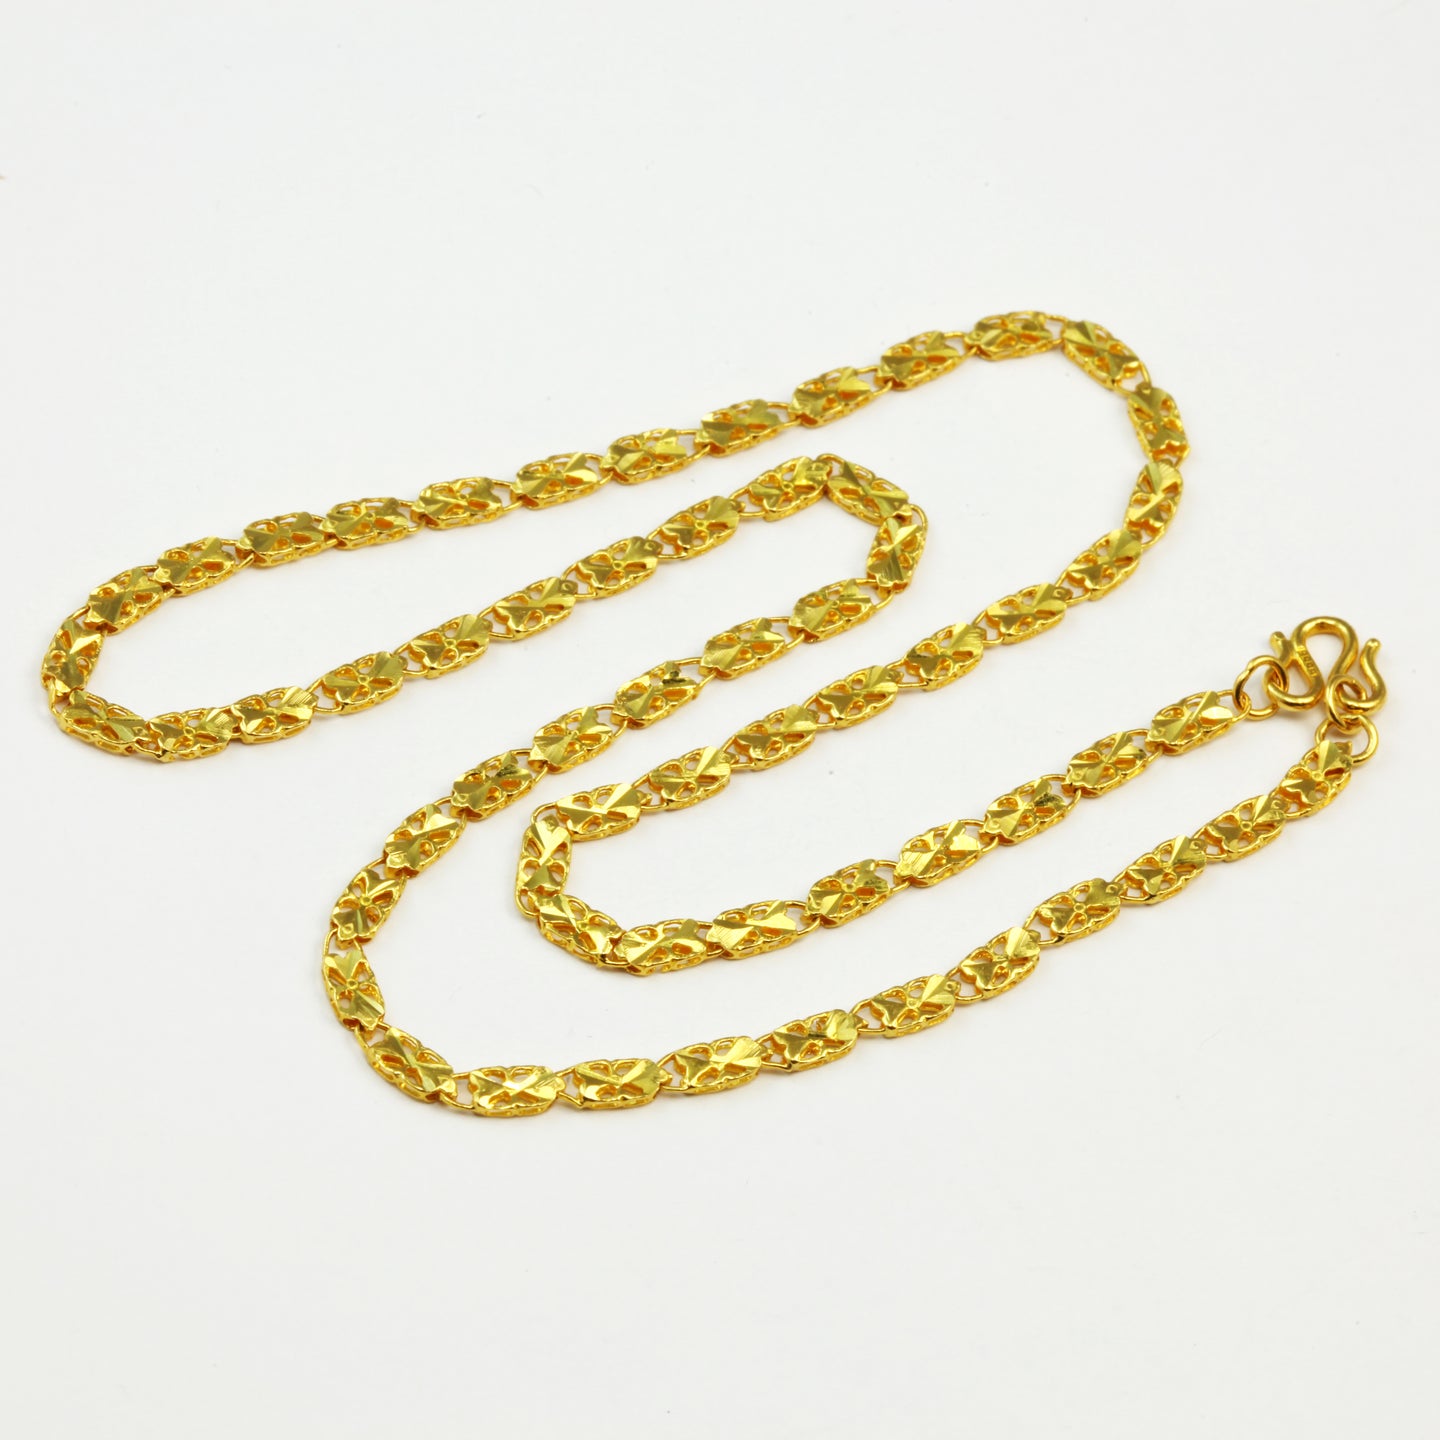 24K Solid Yellow Gold Design Link Chain 9.74 Grams 17